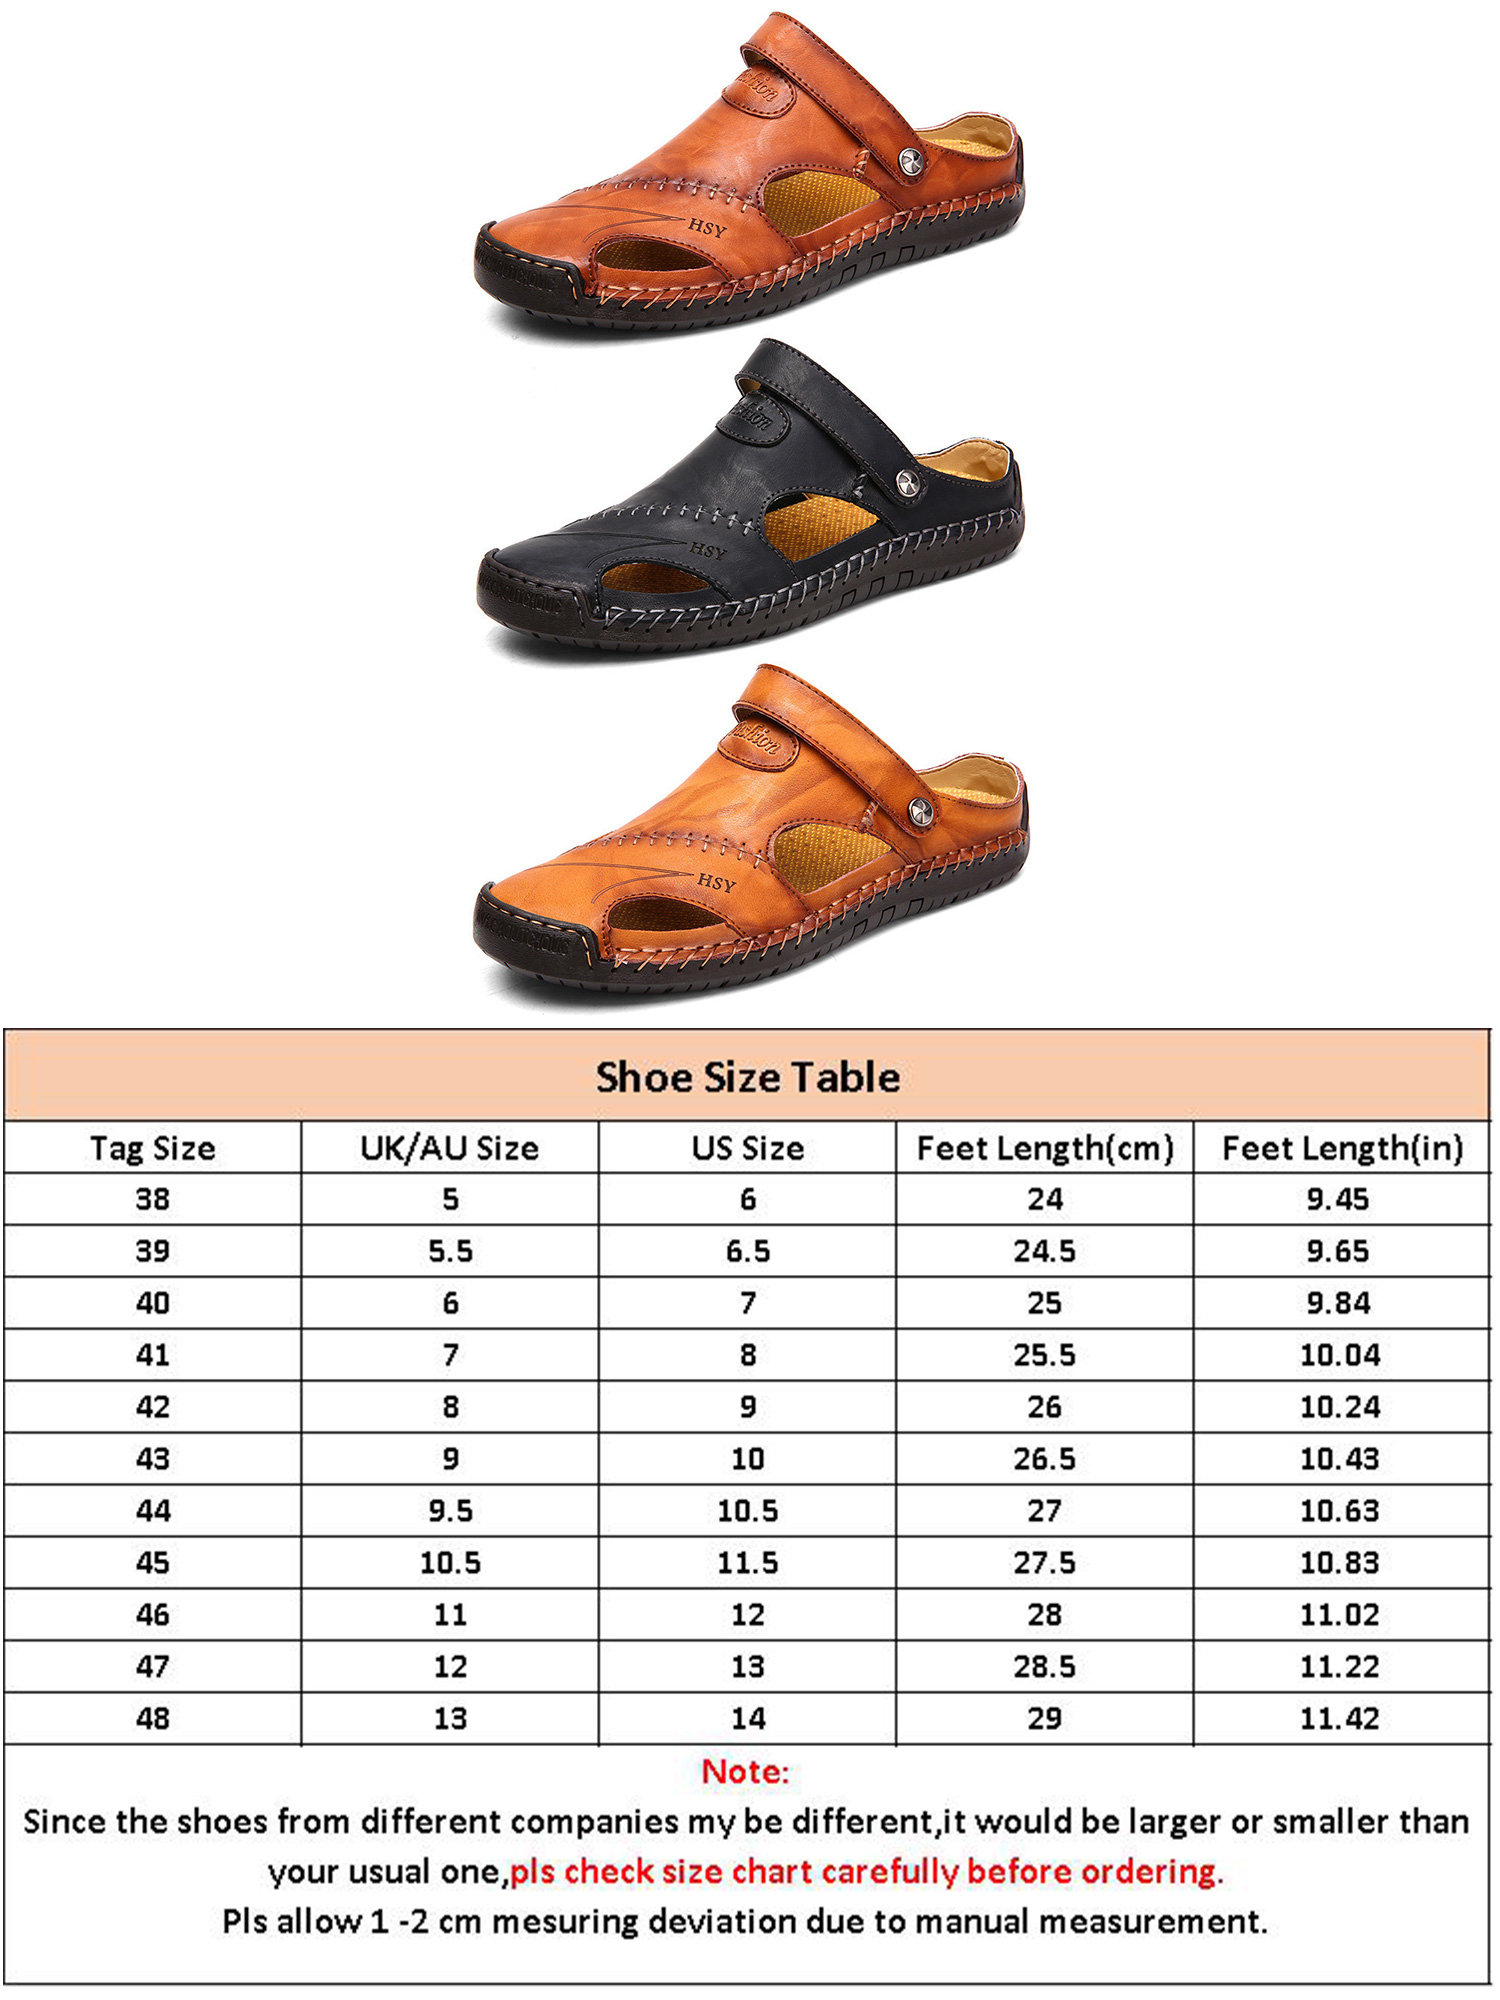 Avamo Mens Beach Sandals Leather Shoes Casual Summer Clogs Shoes Fashion Men Slippers - image 2 of 5